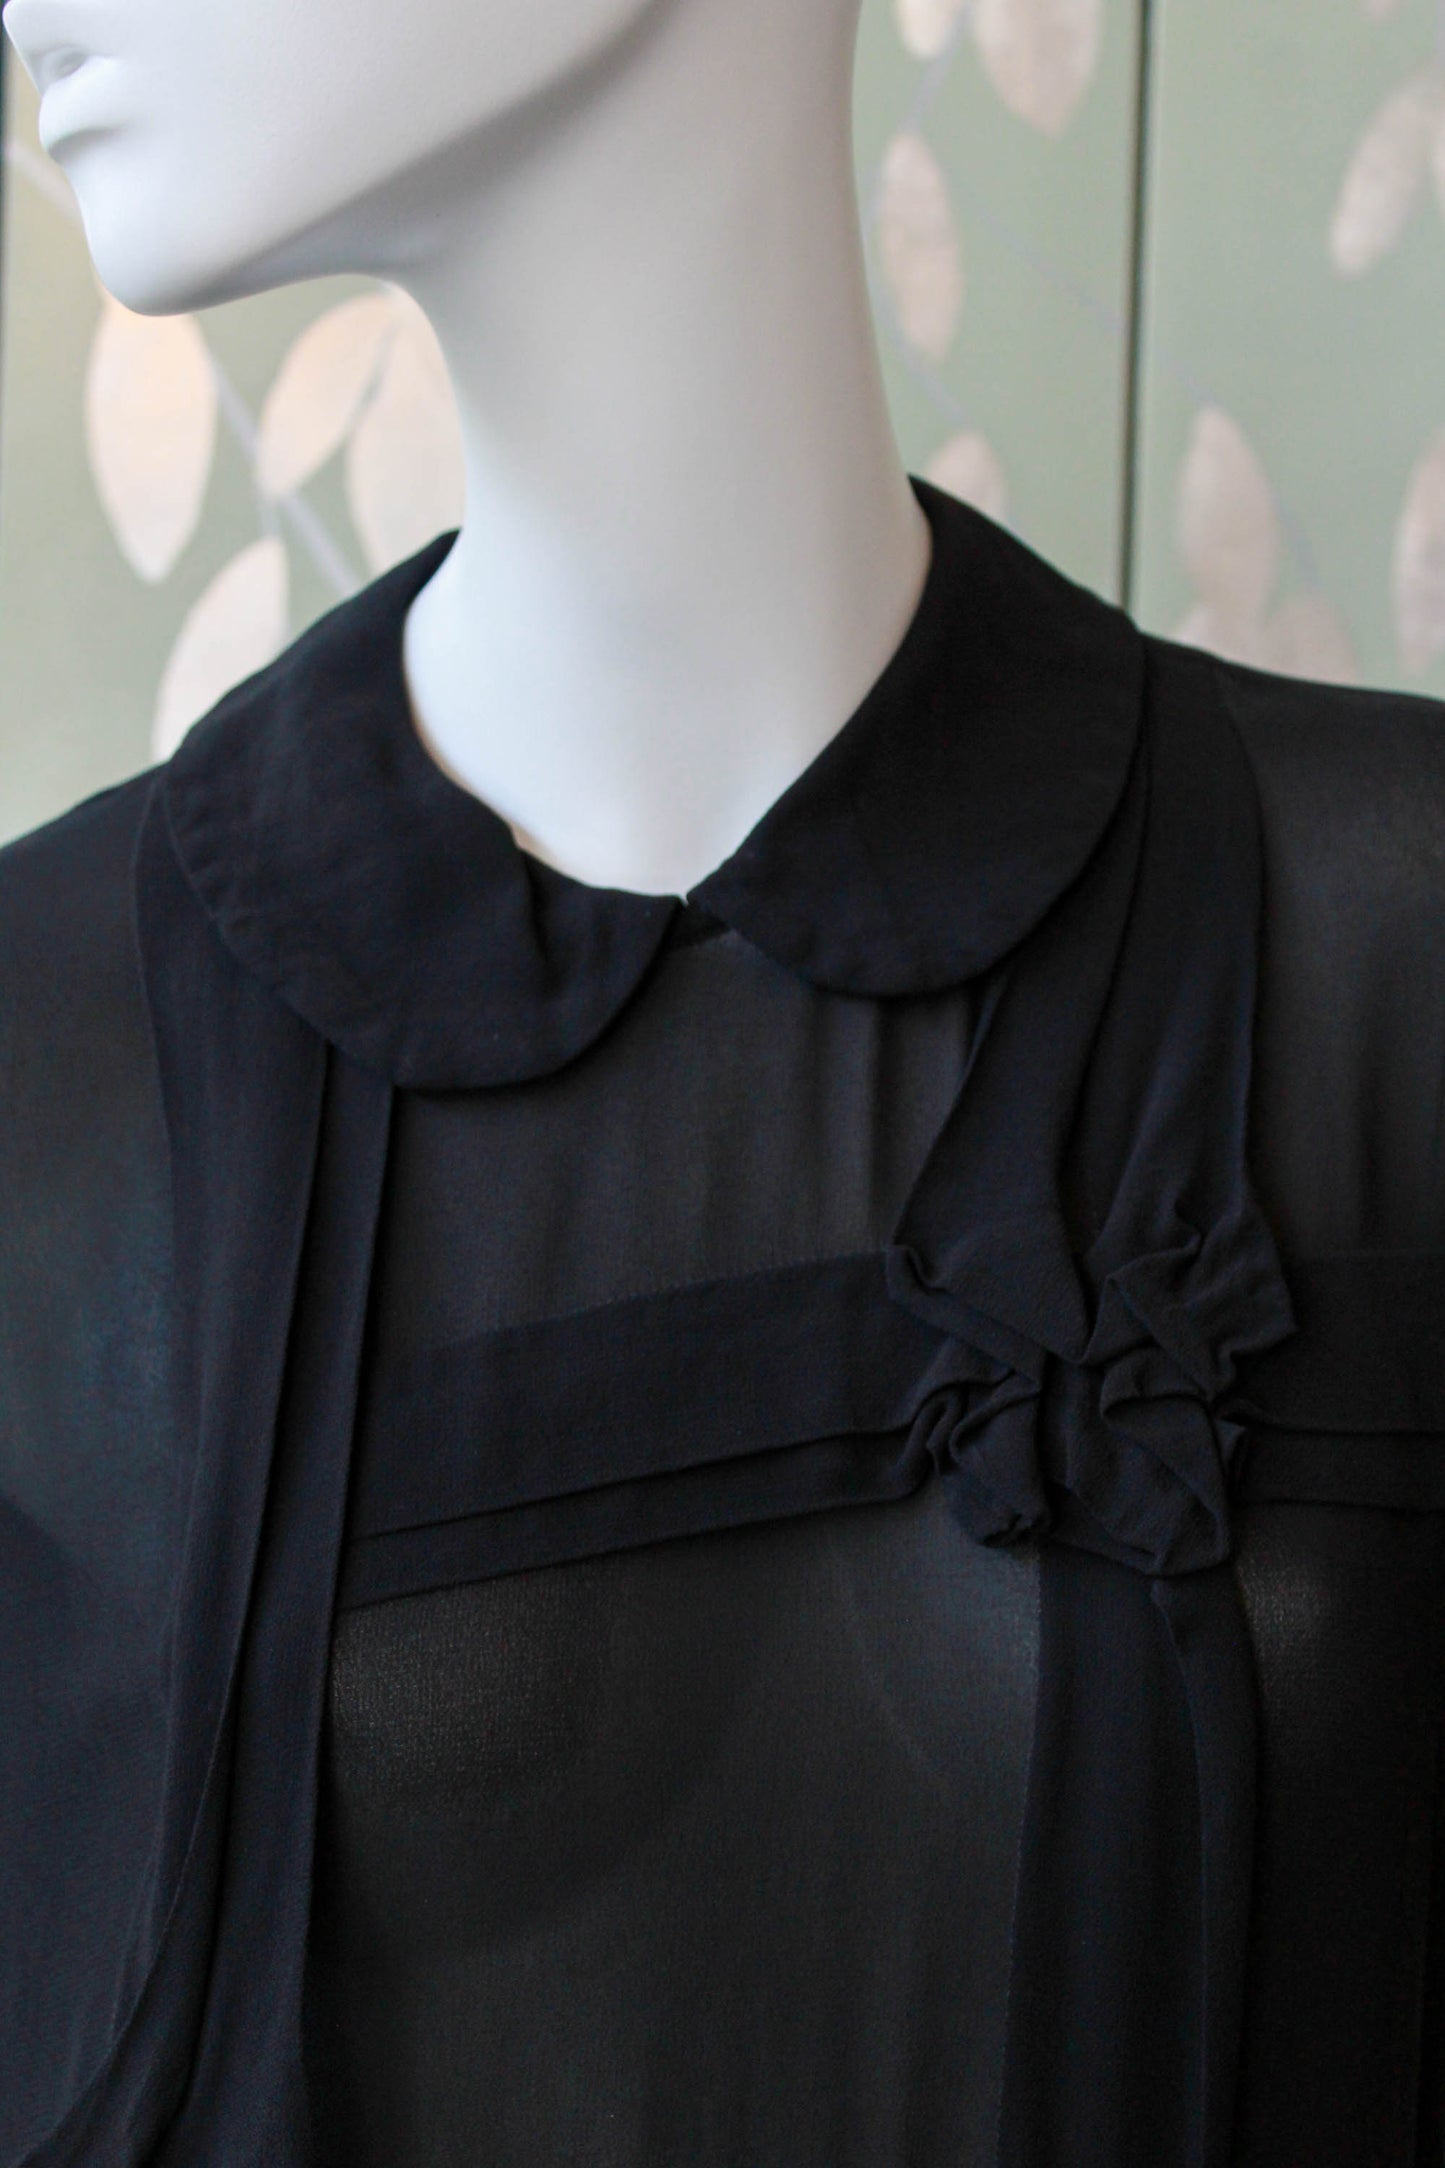 comme des garcons sheer black dress with peterpan collar, gathered skirt, short sleeves, pleated know detail on front, midi length